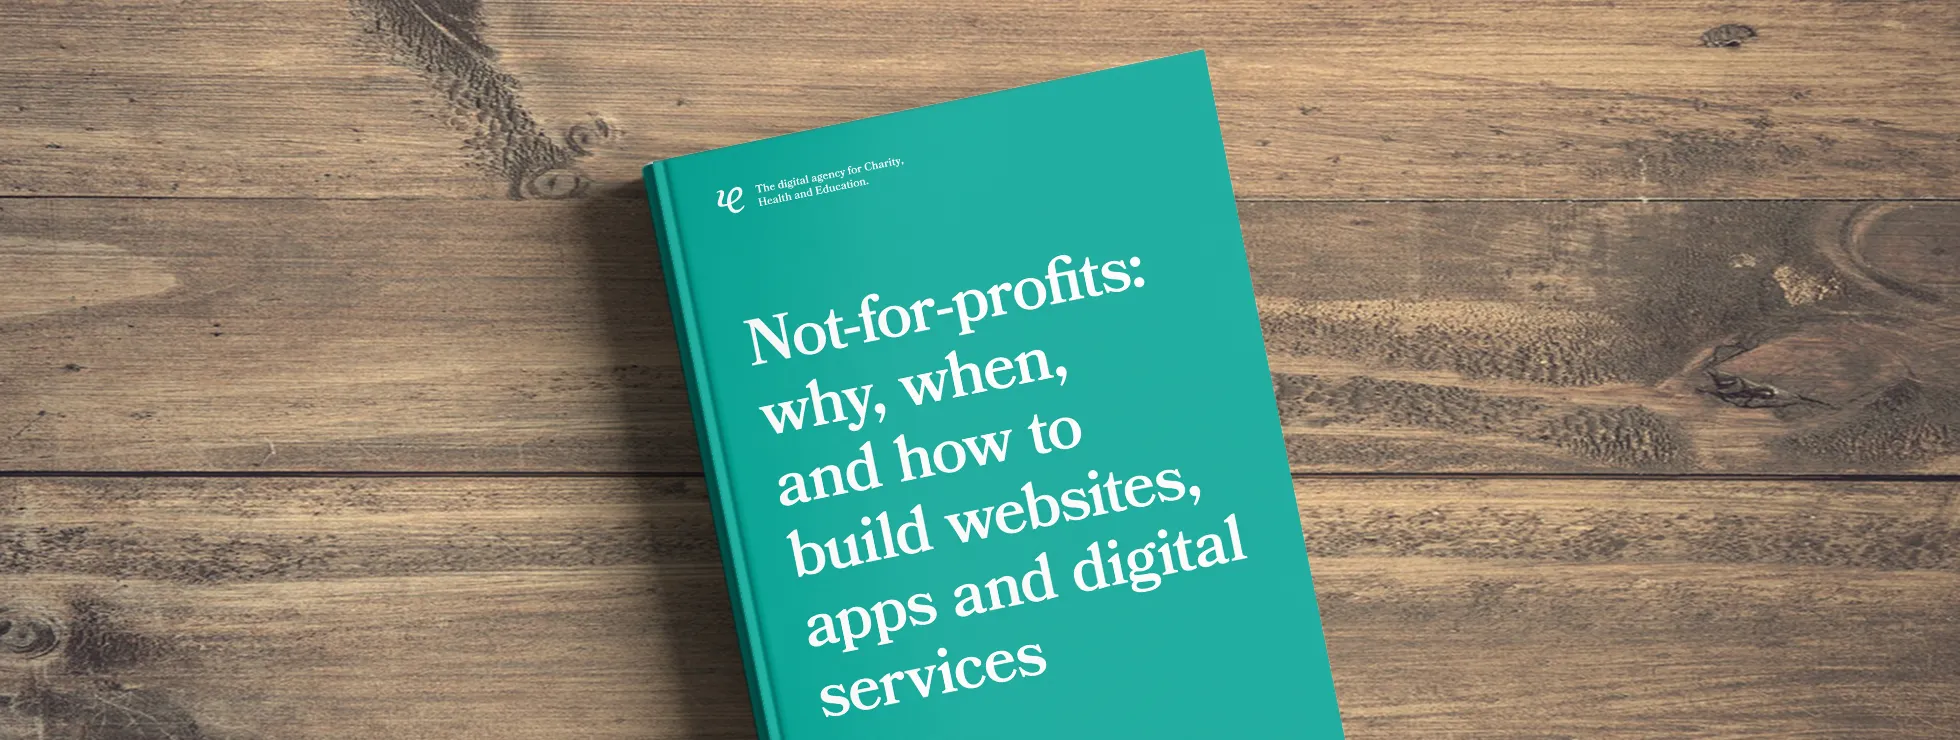 Free not-for-profit digital white paper: why, when and how to build websites, apps and digital services